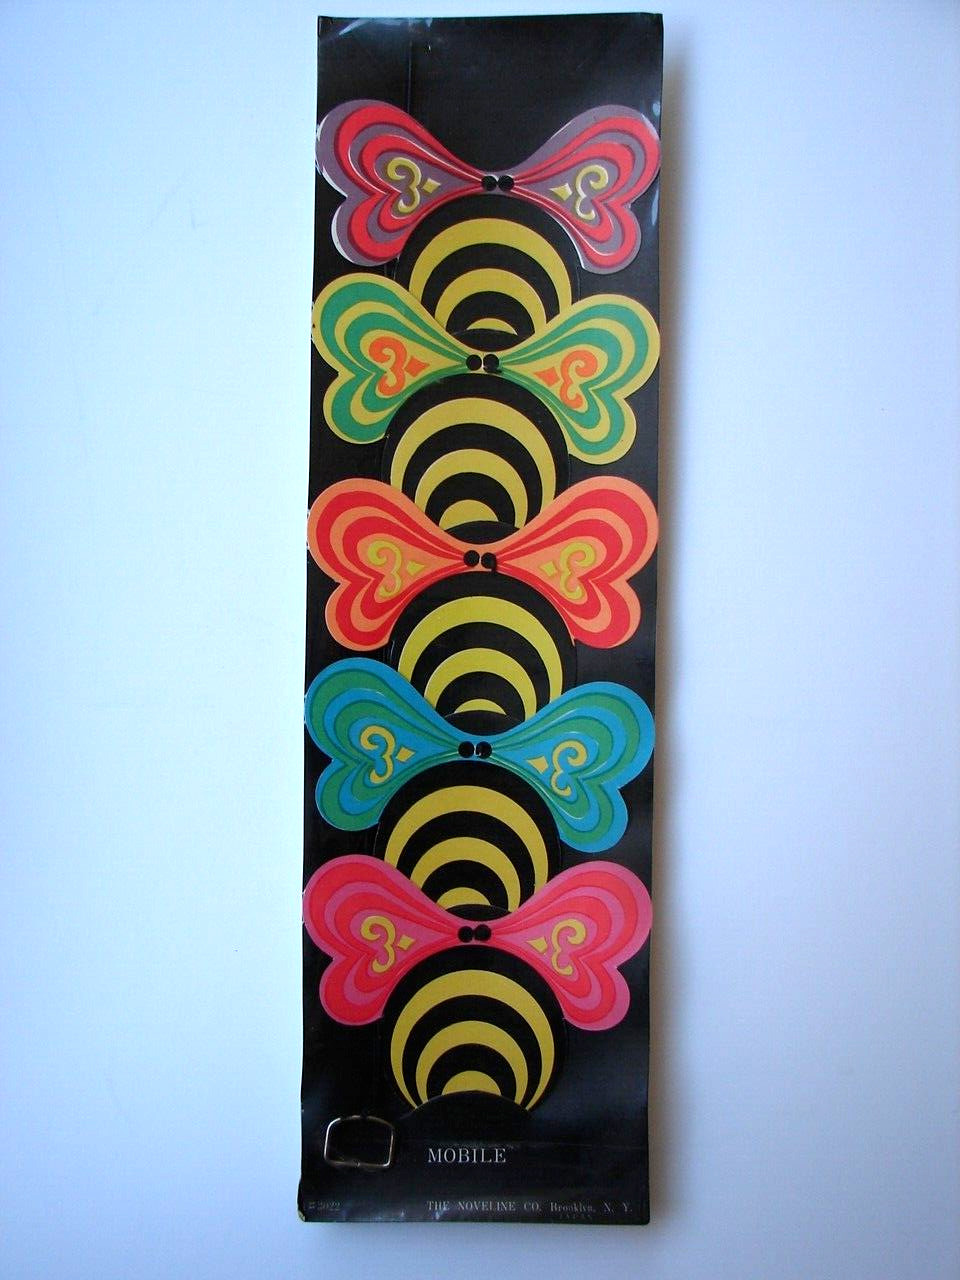 Vintage 1960s Blacklight Mobile Insect Wing Psychedelic Trippy Hippy Noveline Co